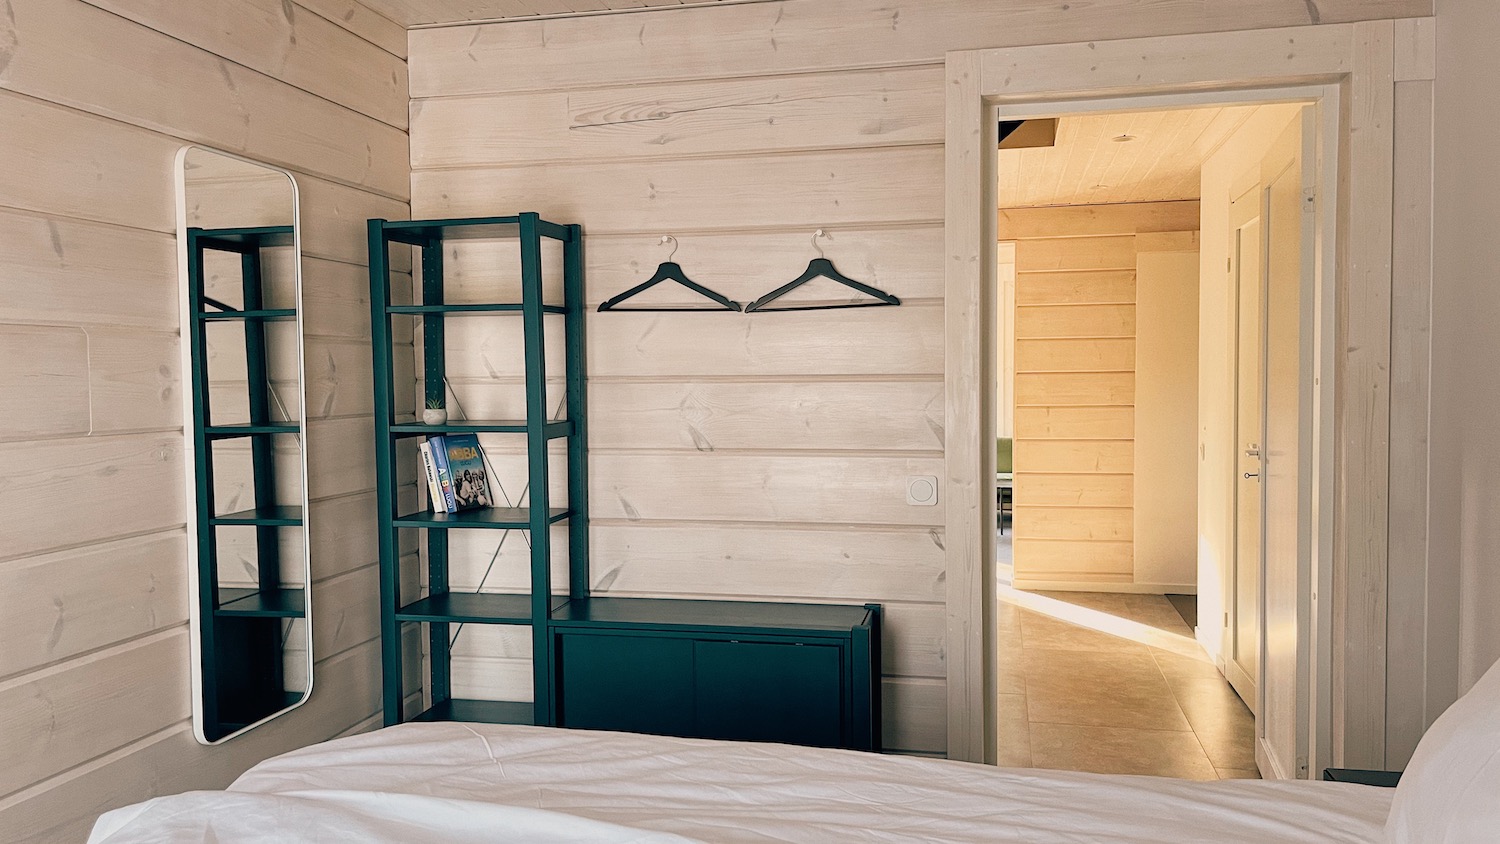 Odi Resort Estonian forest cottage with a terrace, bbq and a sauna tub, best accommodation in Estonia